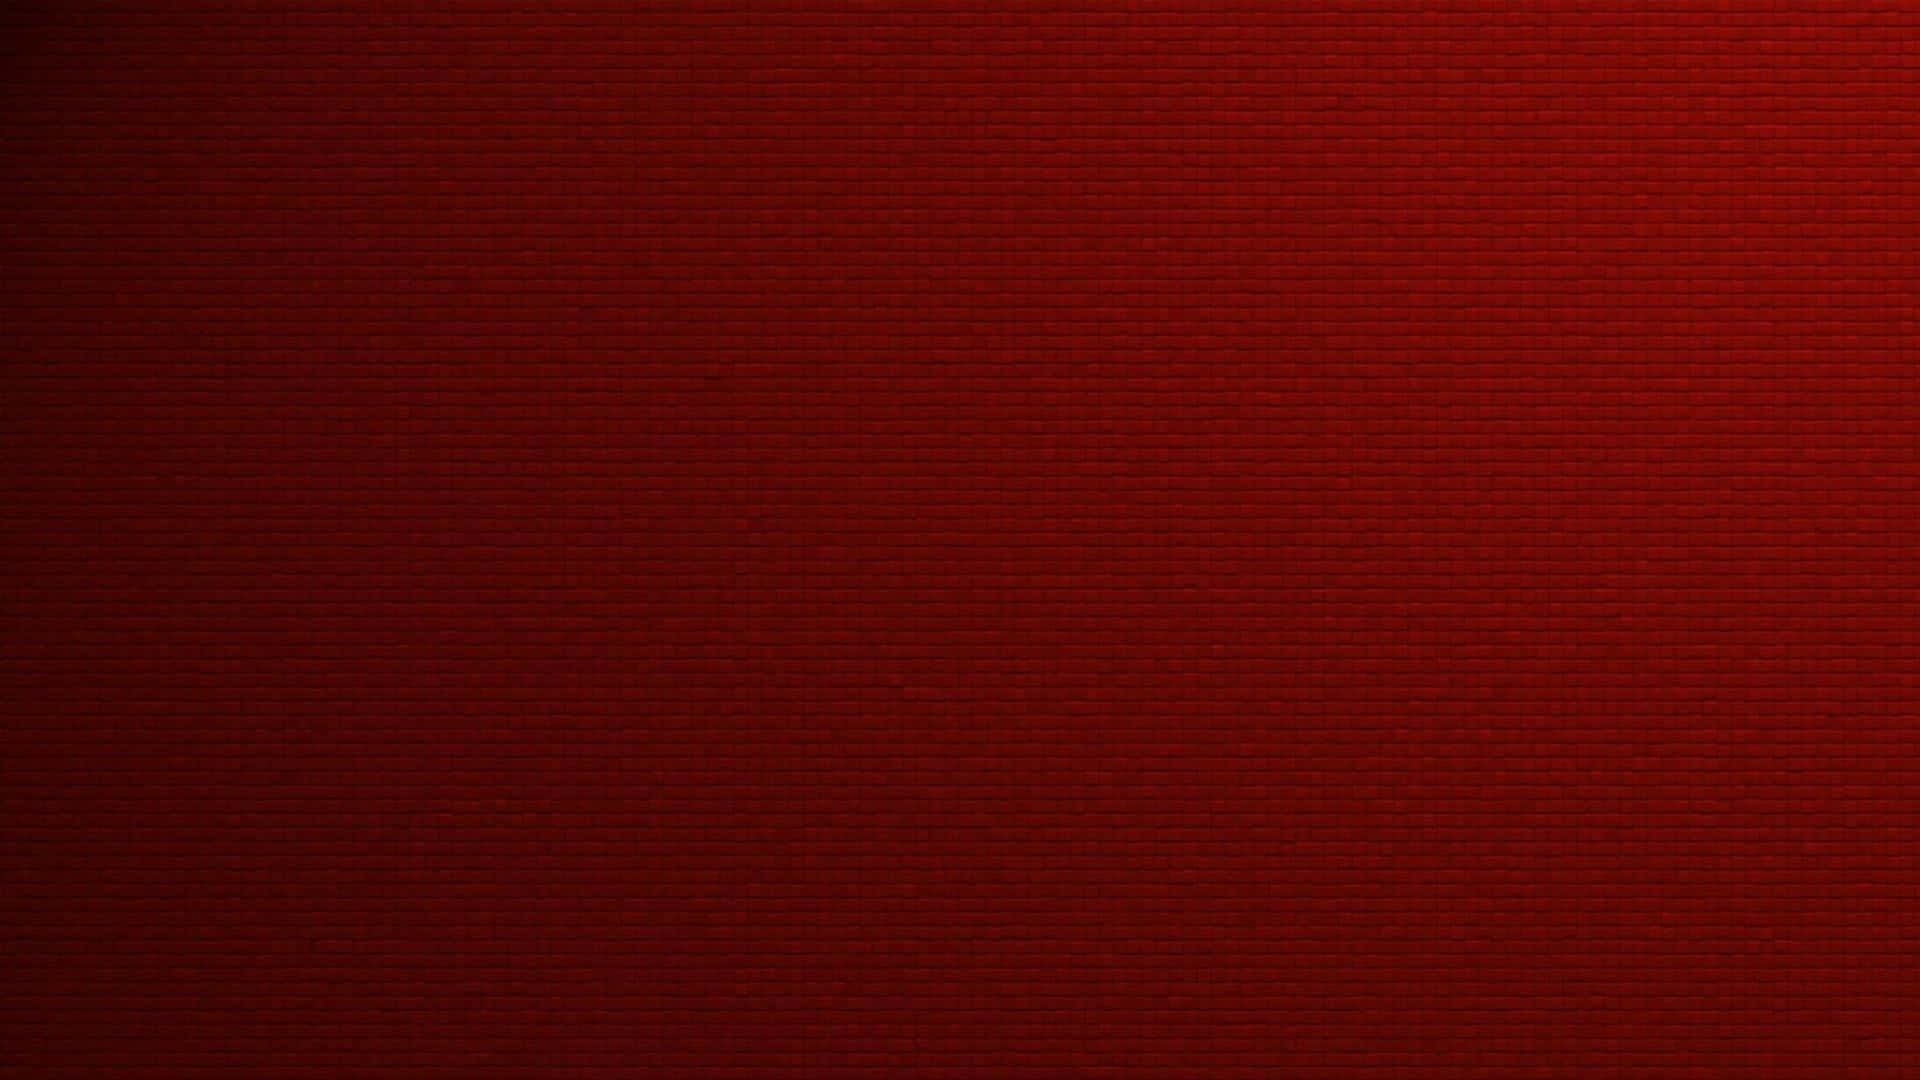 Free Solid Red Background Photos, [100+] Solid Red Background for FREE |  